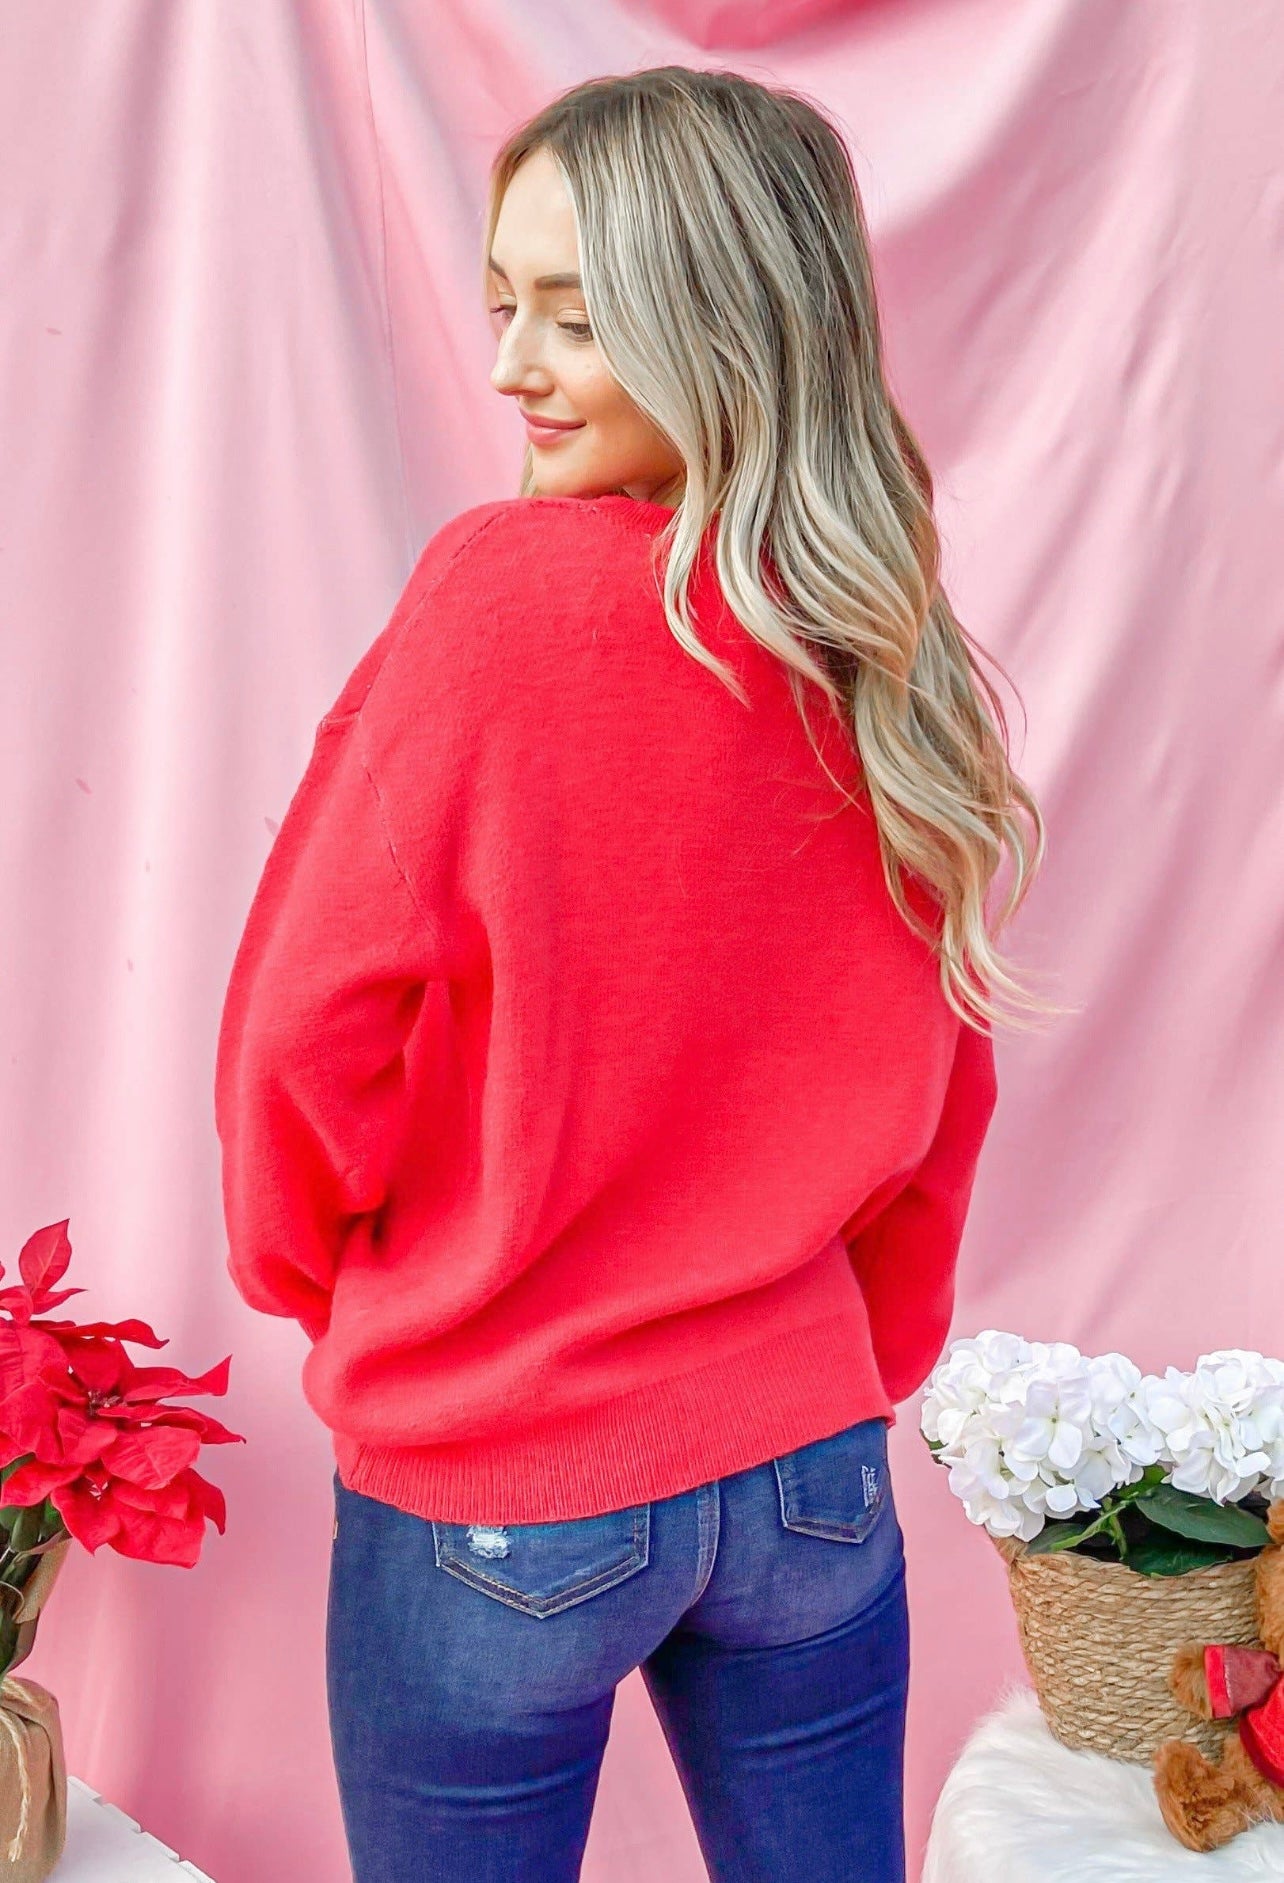 Red Love Sweater